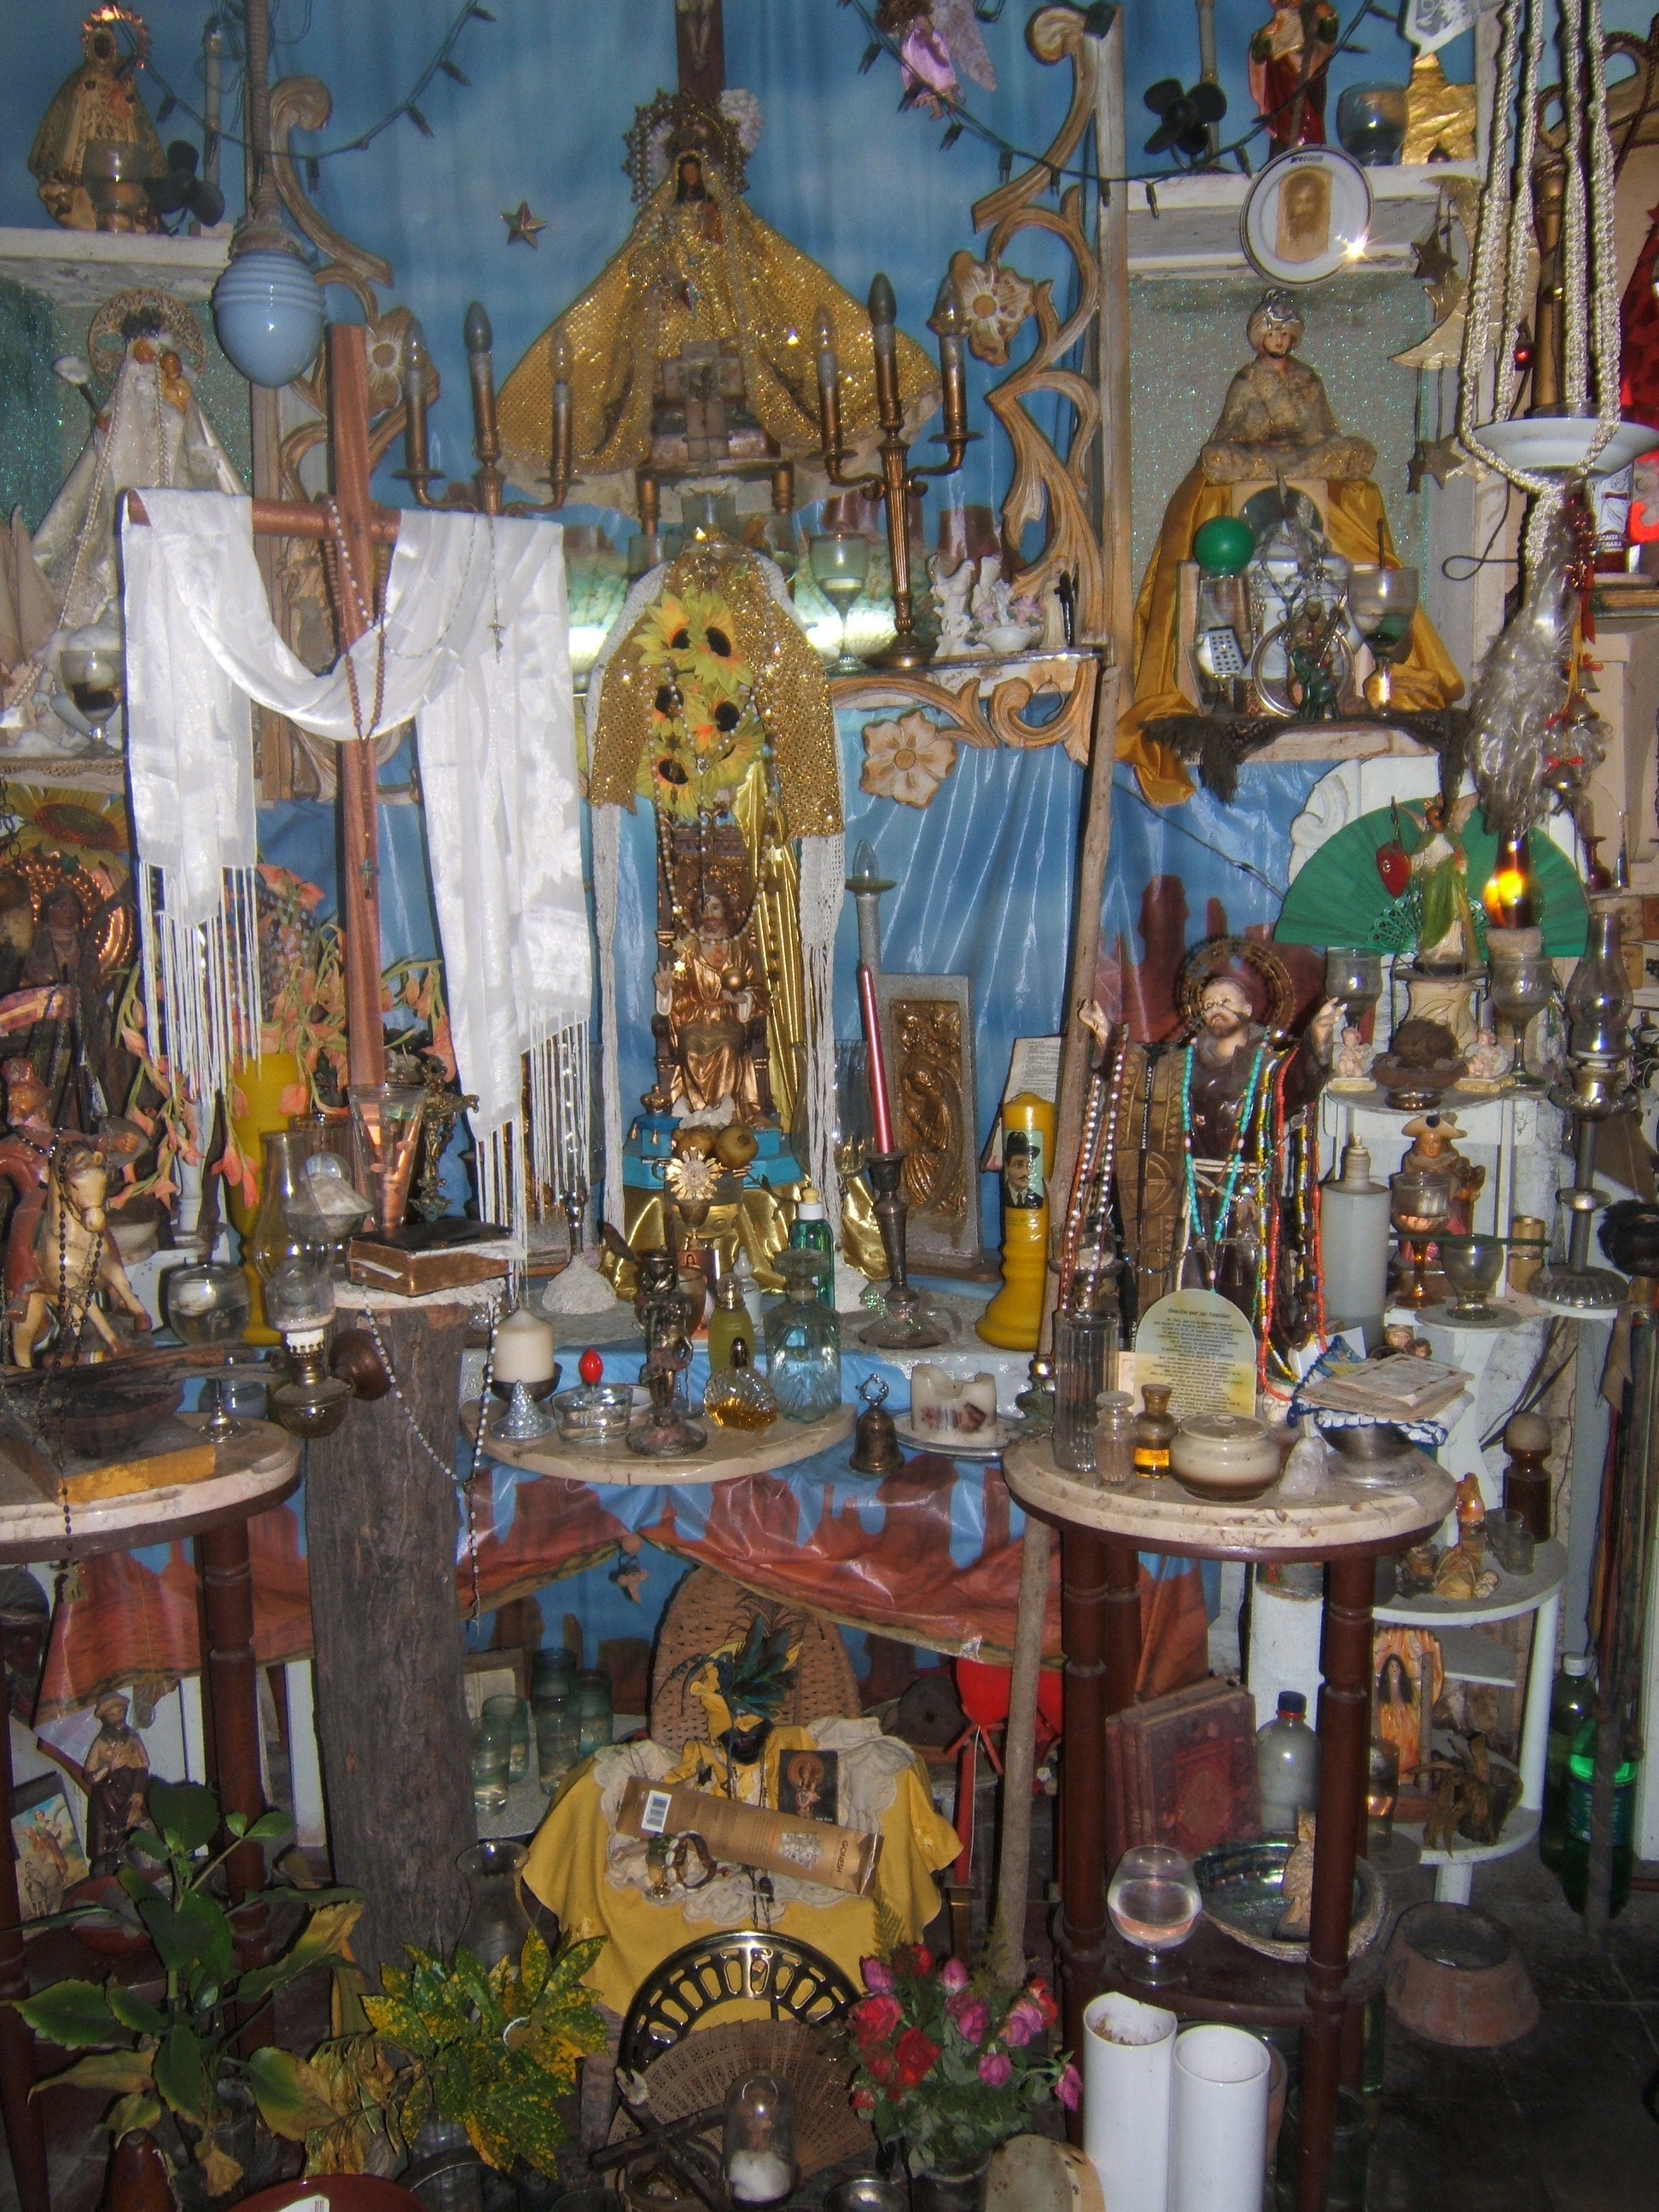 Figure 1. A view of the central altar in the altar room of Pedro, a Cuban religious practitioner from the doorway. The altar’s verticality is shown in multiple representations and doubling of the Virgin of Caridad del Cobre (in gold at apex) and the African spirit Josefina, identified with the oricha Ochún (in gold on floor). They are linked by a golden axis of other figures and adornments and surrounded by a host of other figures and offerings. Santiago de Cuba, August 2008. Photograph by author.